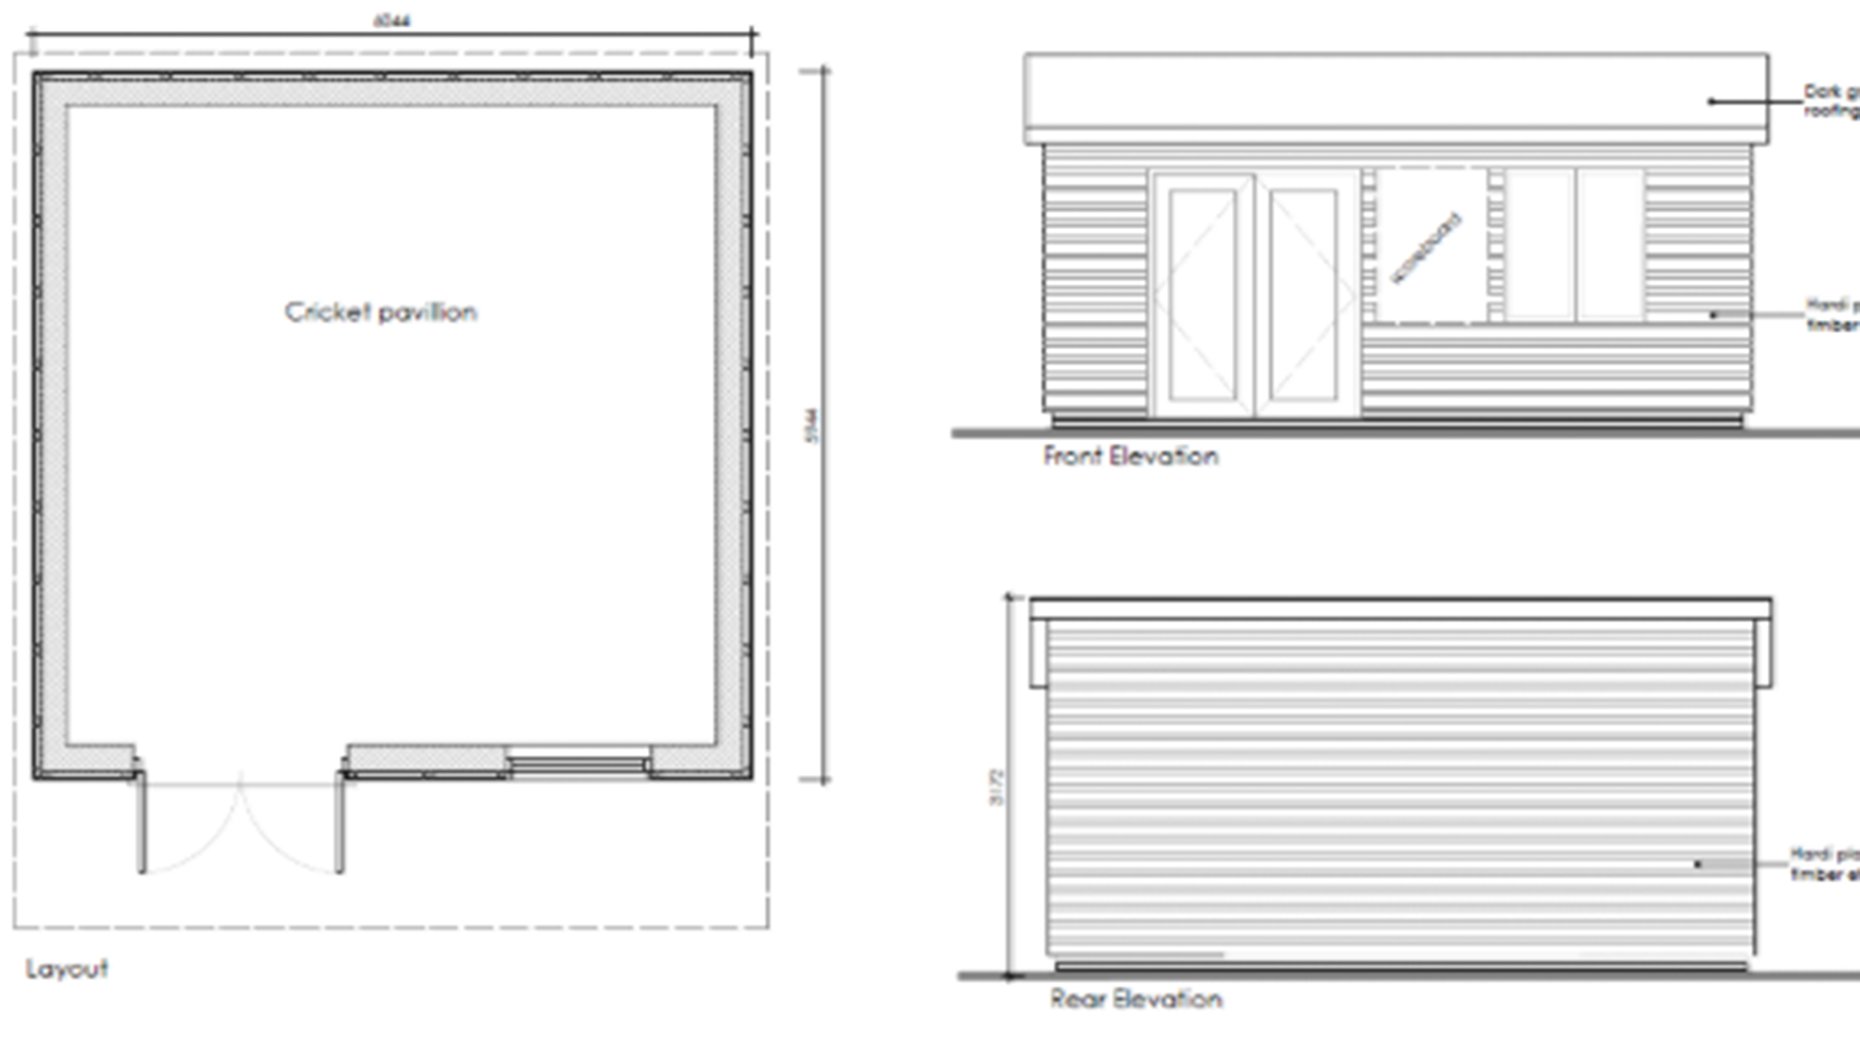 Initial designs for the proposed West Common cricket pavilion.